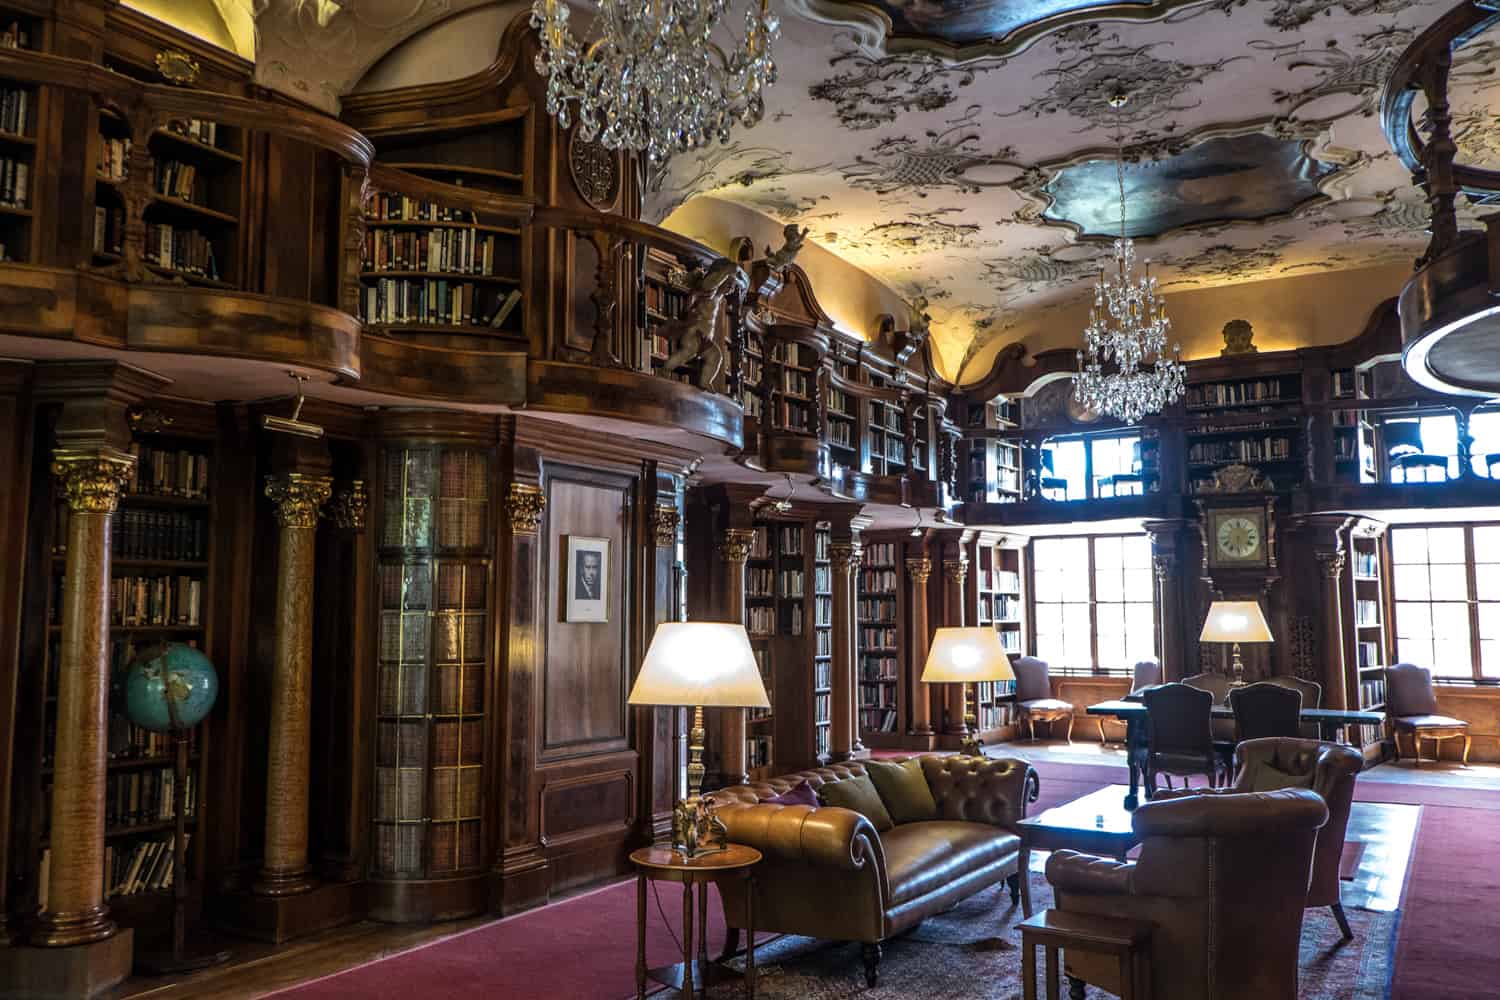 An old, classic, dark wood panelled interior of the library at Inside the library of Schloss Leopoldskron in Salzburg, Austria. The room is complete with a dark red carpet and leather sofas. 